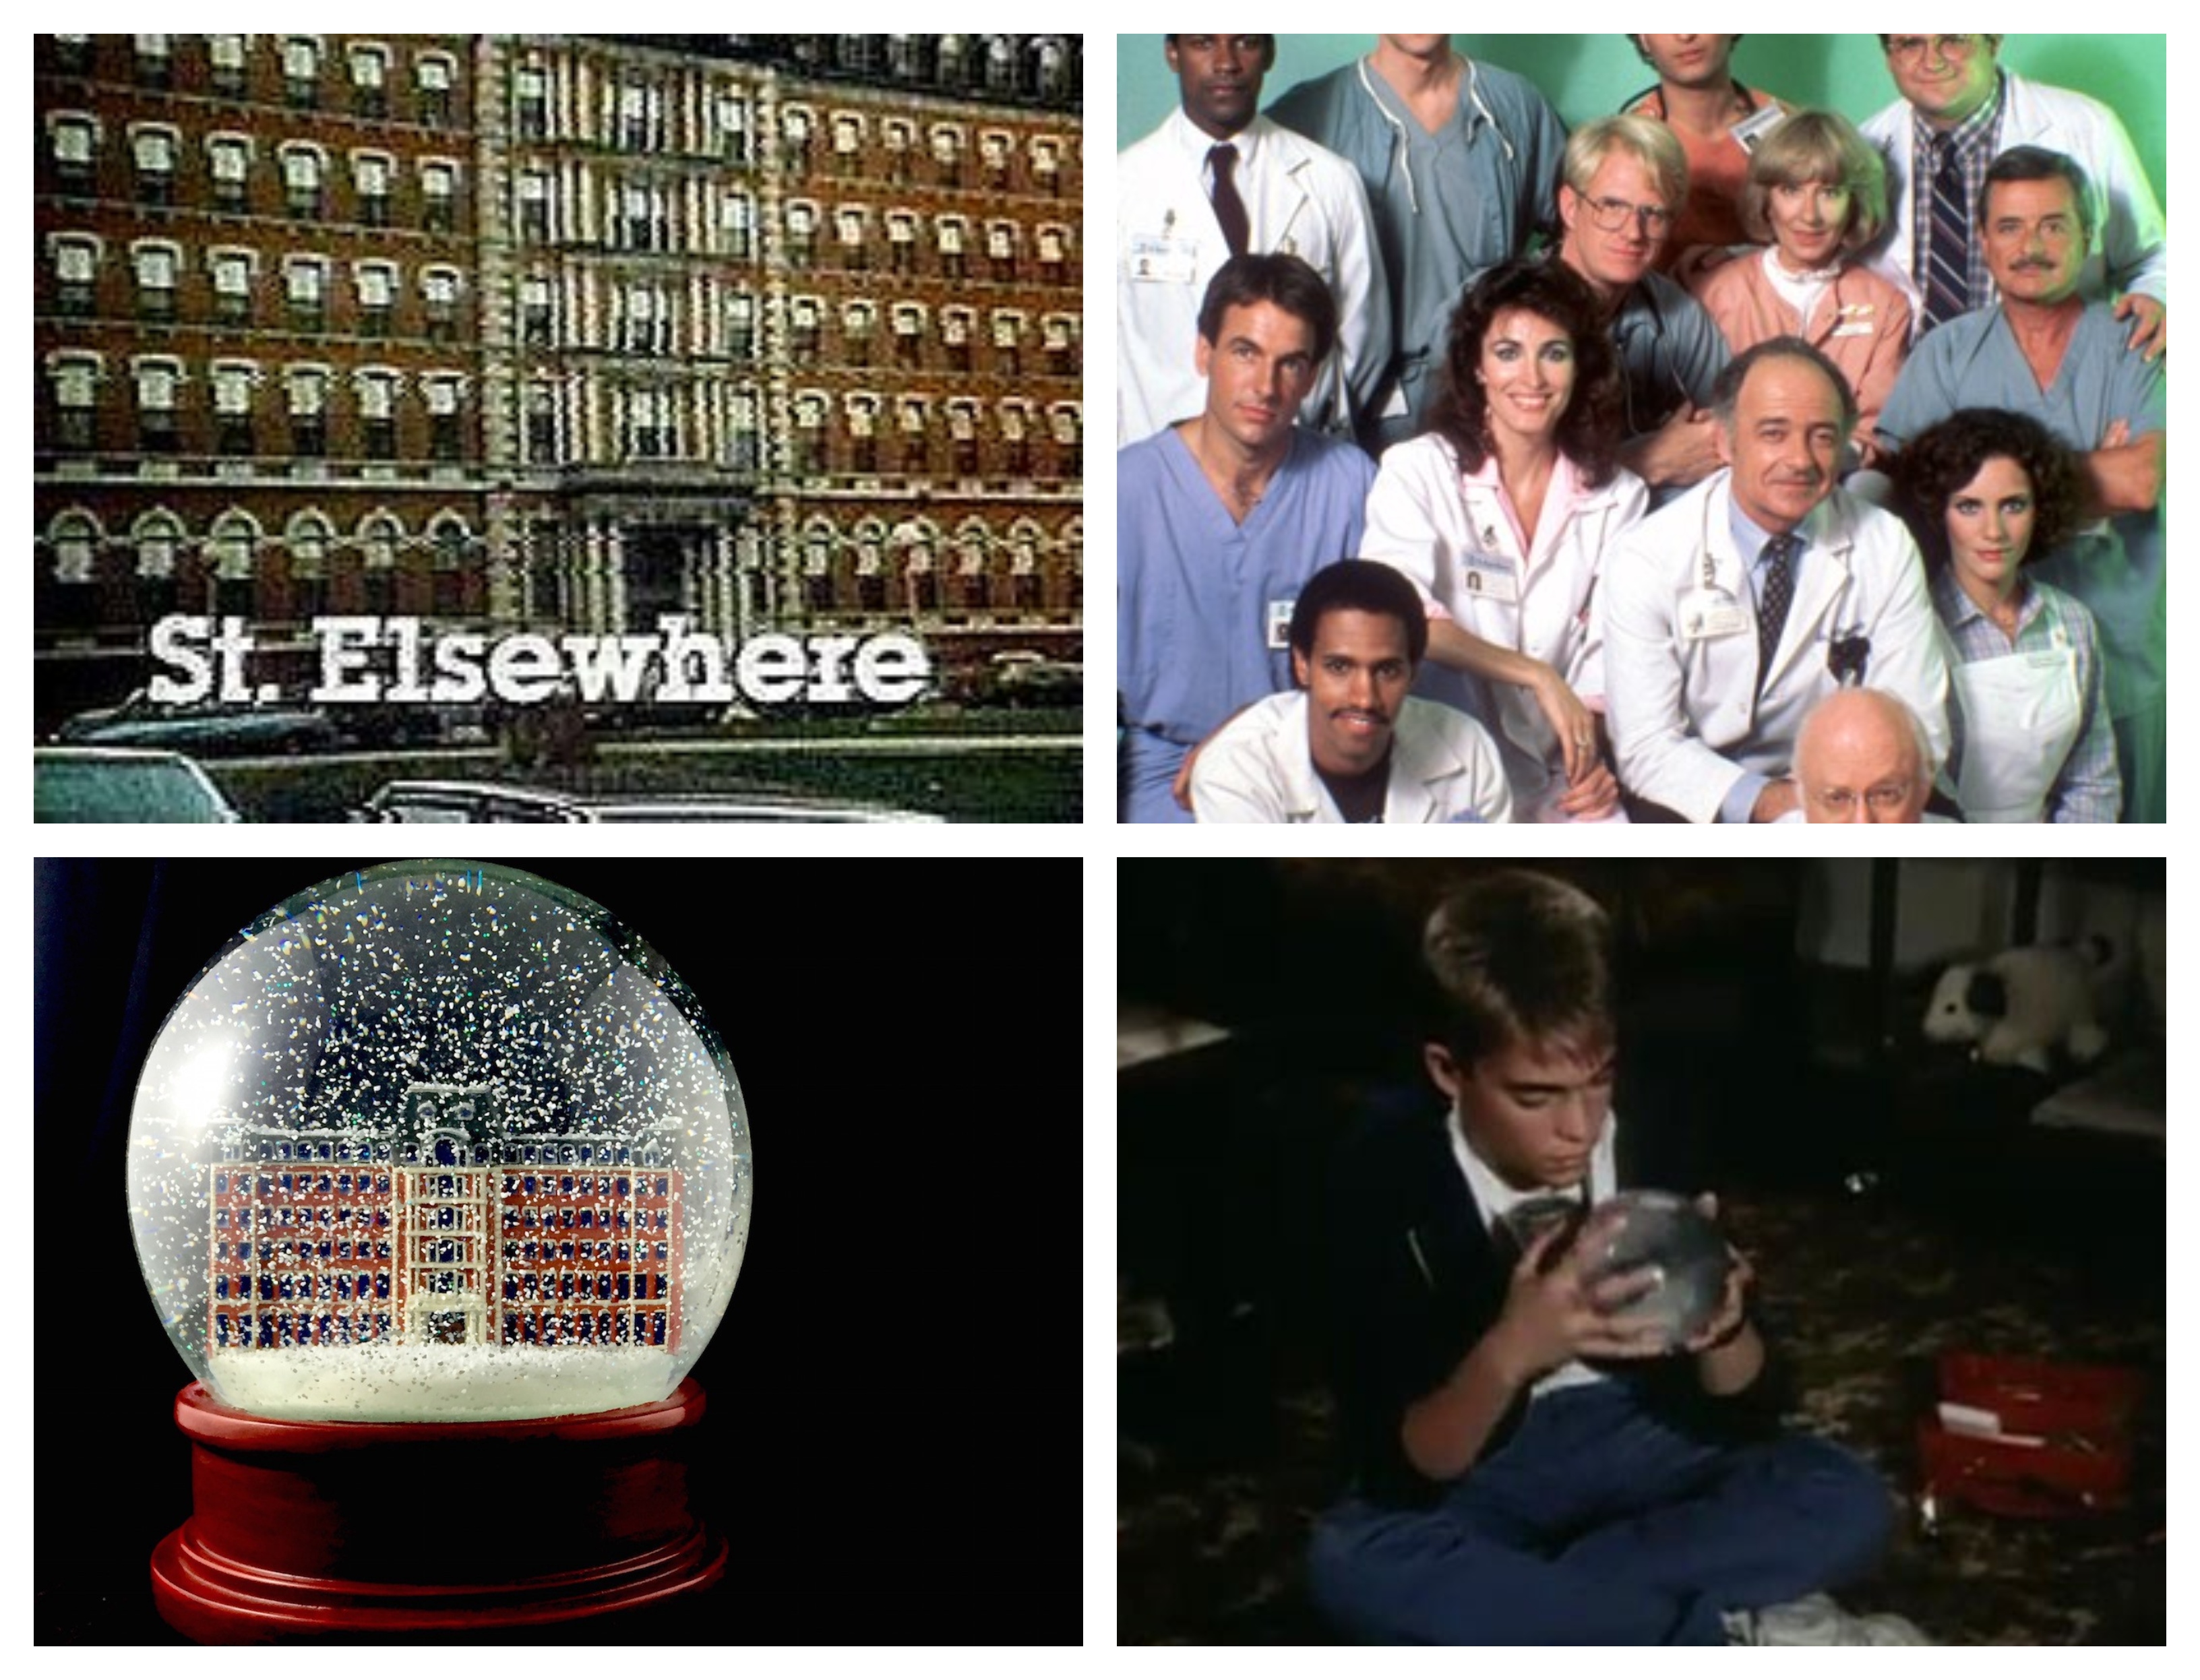 In Its Final Episode, What TV Show Revealed That The Hospital Was Actually Inside A Snowglobe